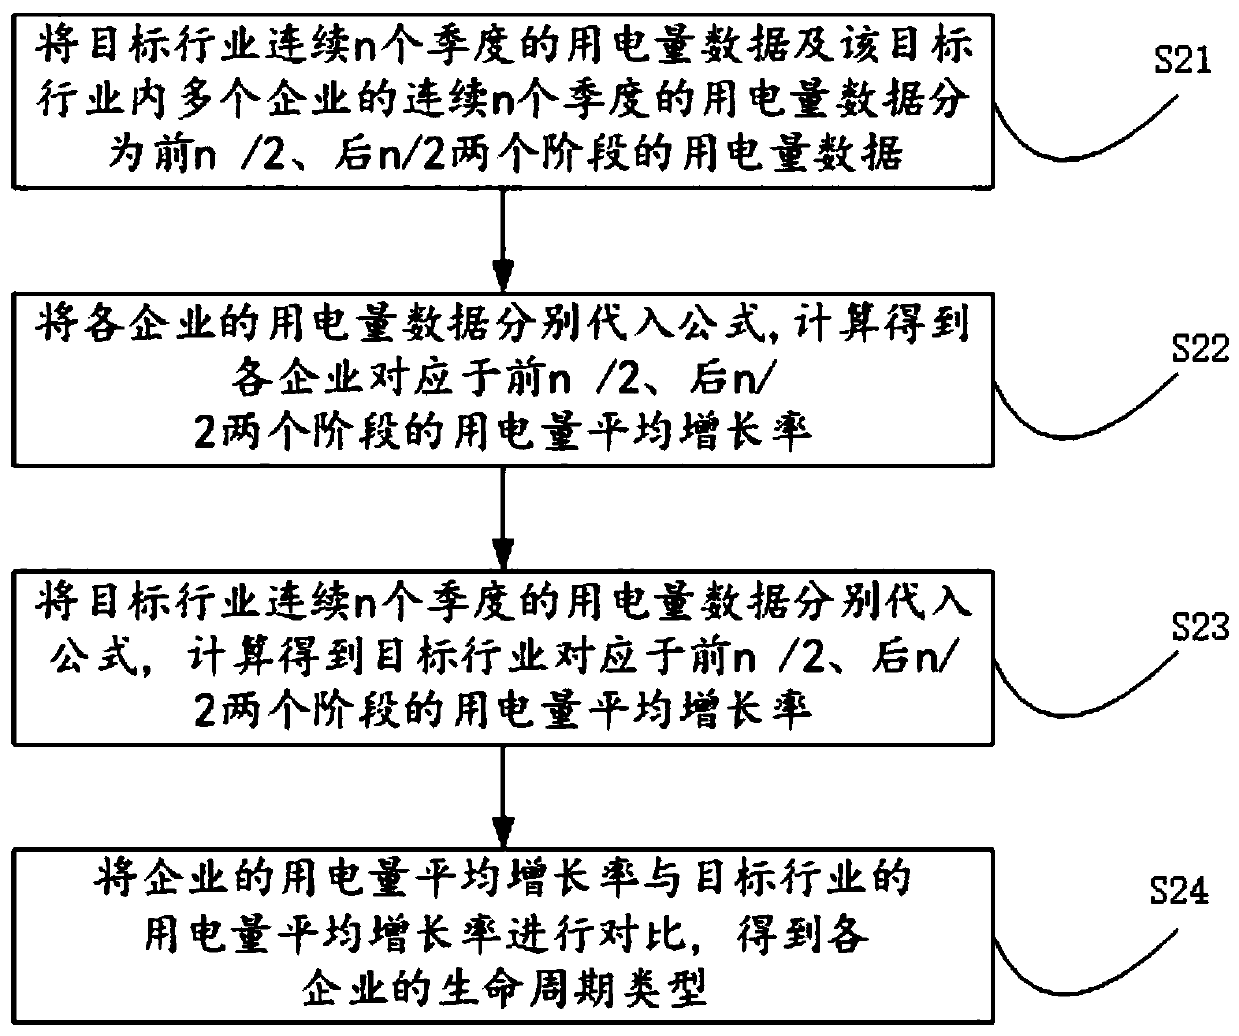 Enterprise life cycle stage identification method and identification system based on electricity consumption data